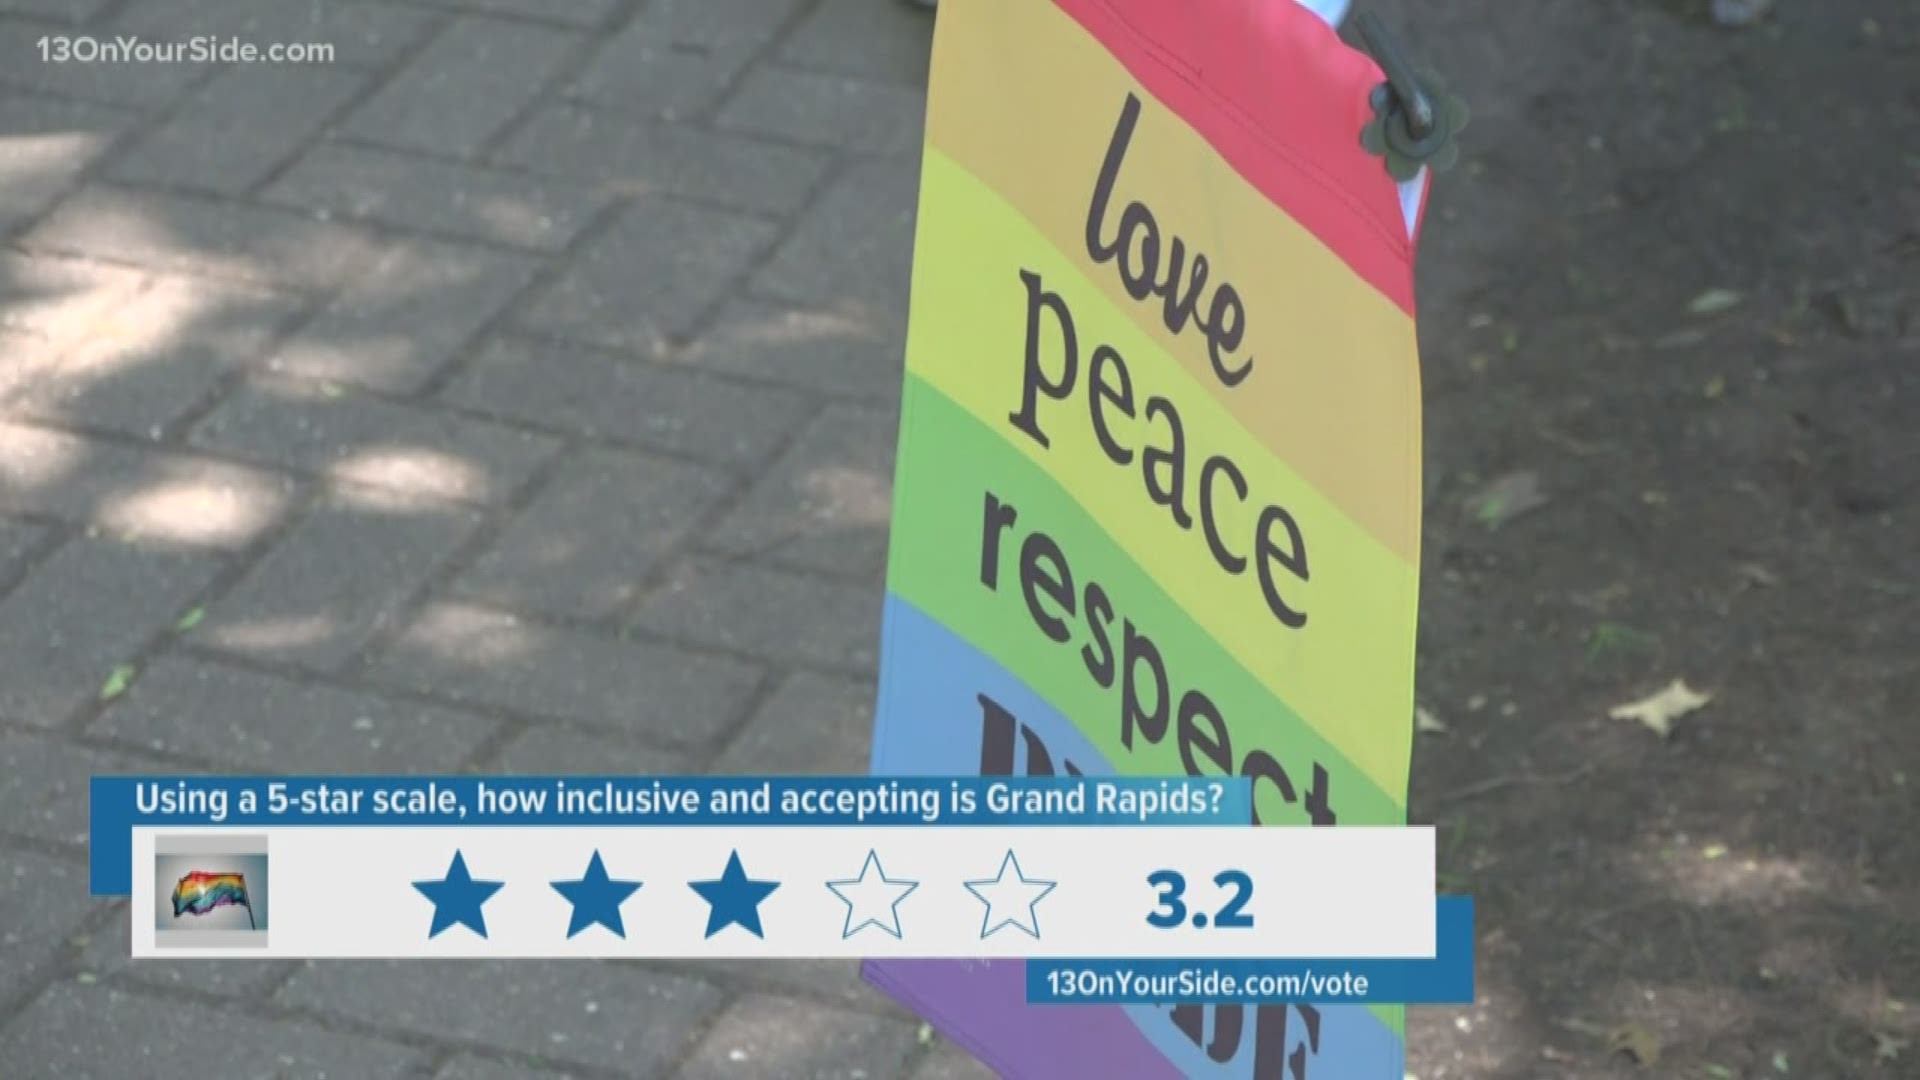 Grand Rapids has been trying for a while to create more equality for the LGBTQ community.